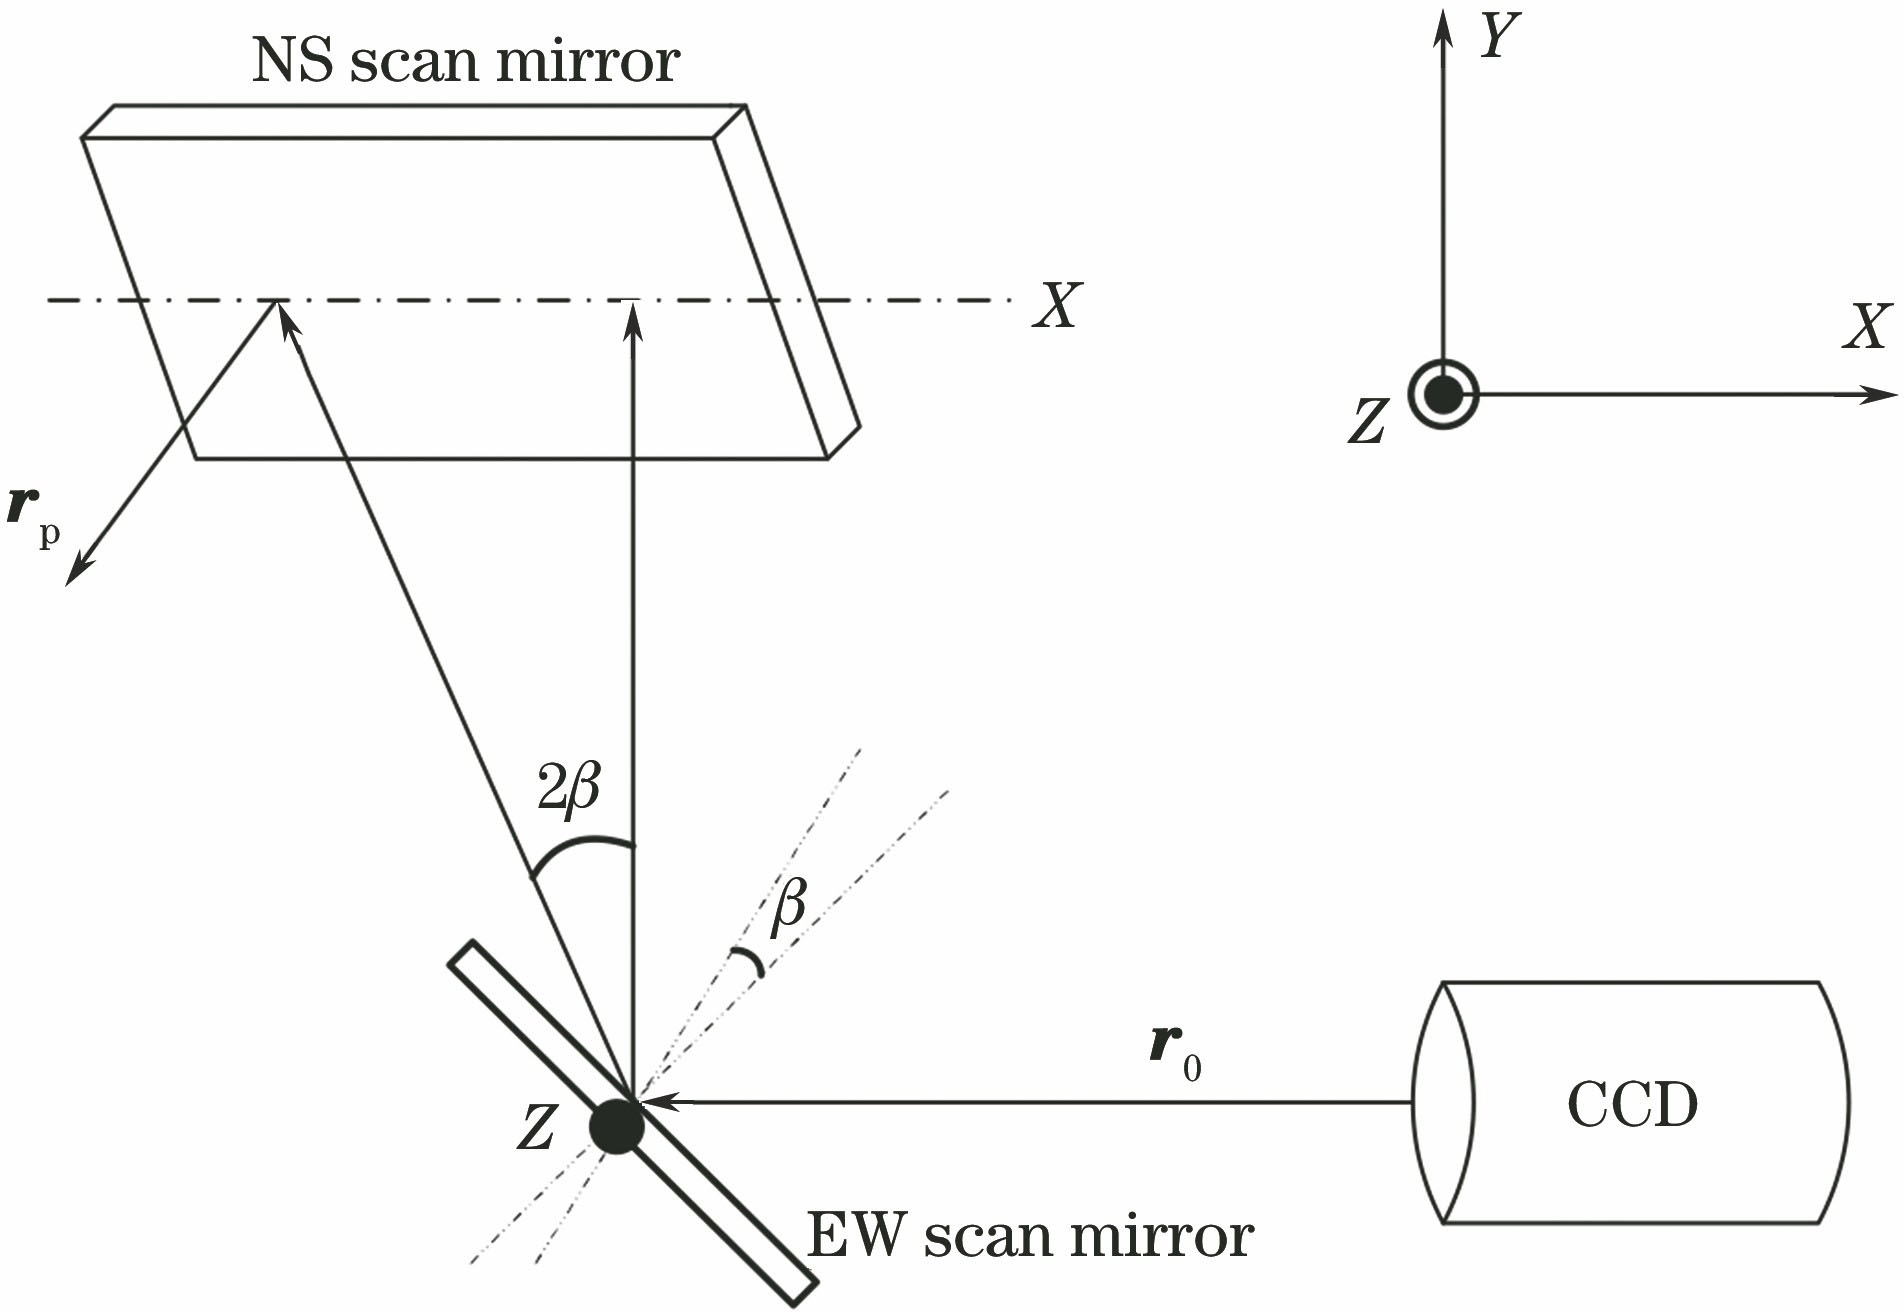 Schematic of scanning mirror optical path of FY-4A imager